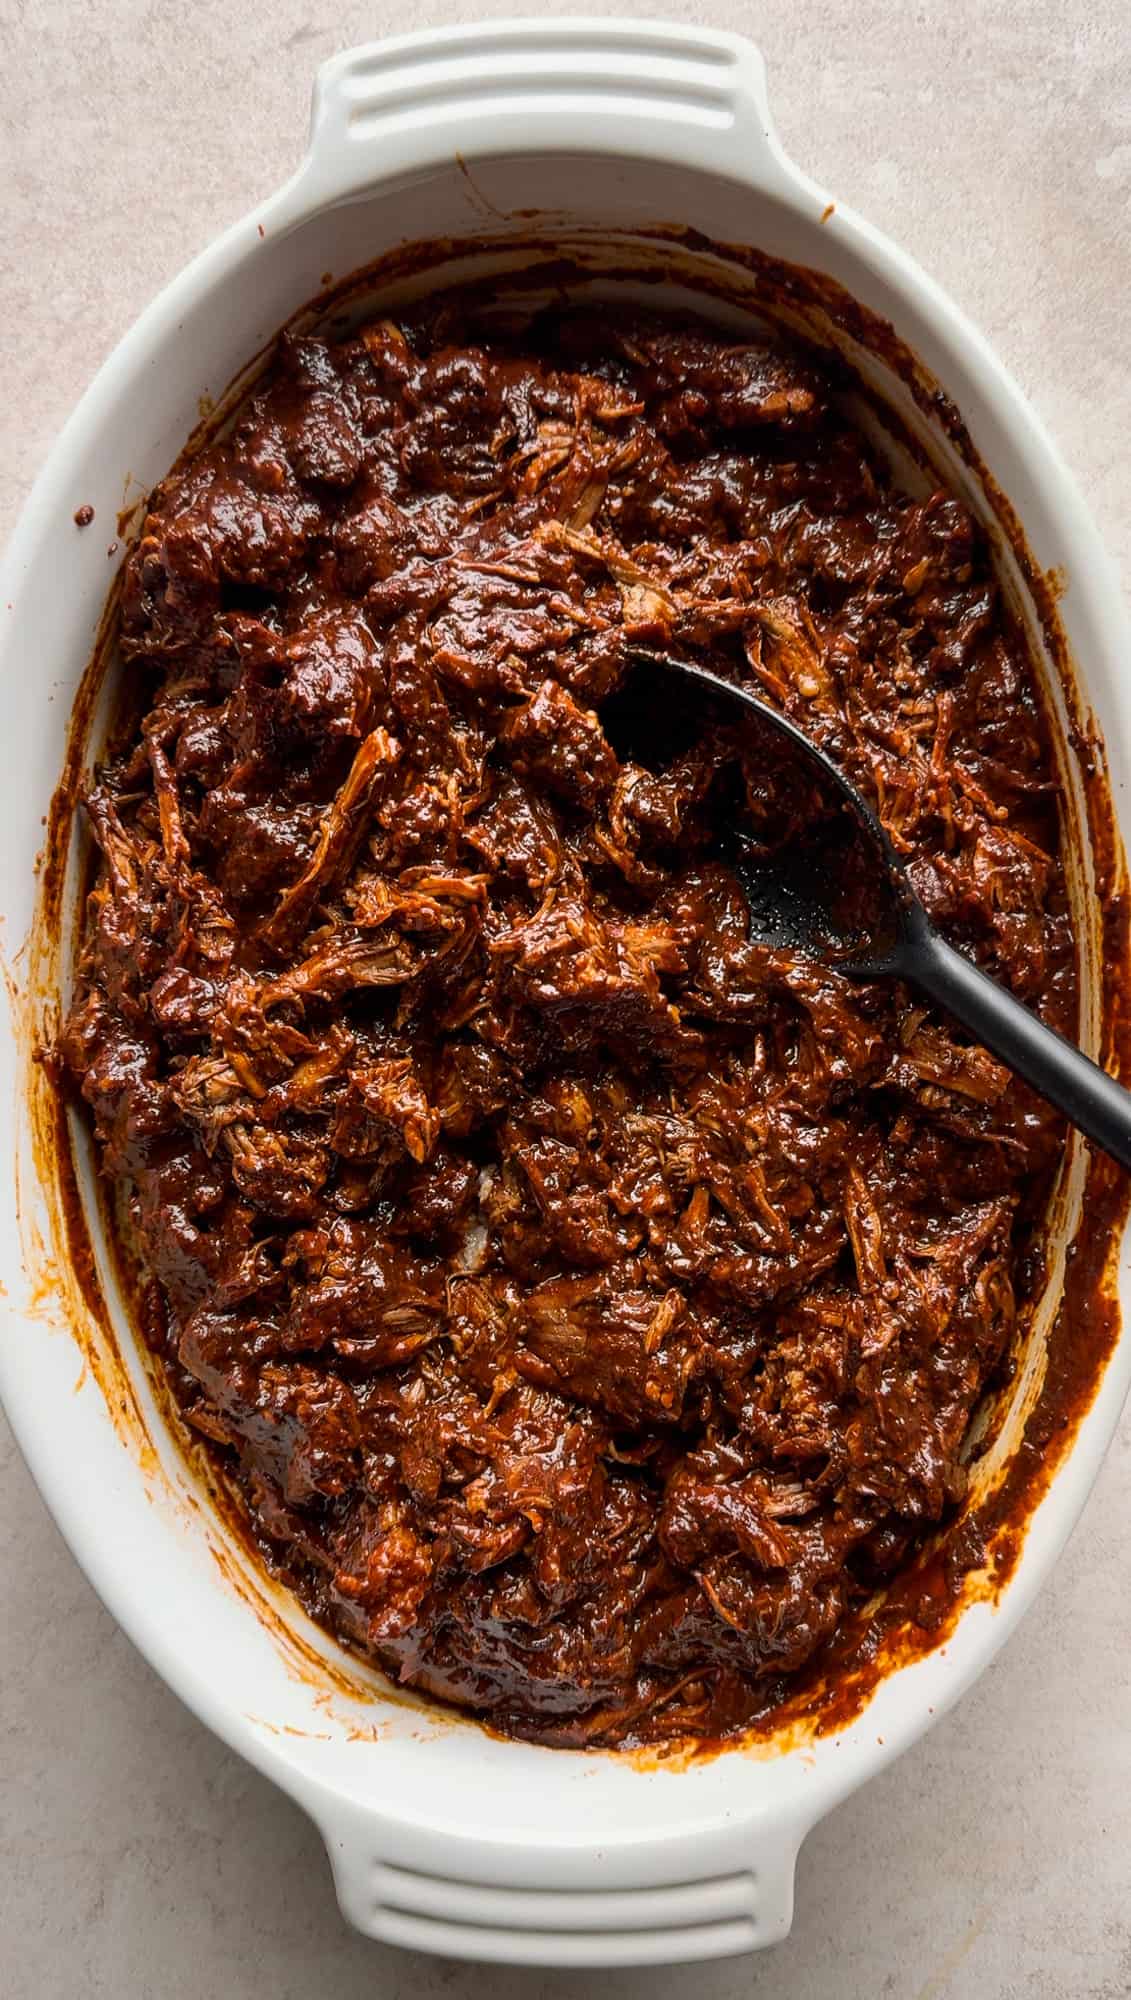 Shredded pork in a red chile sauce.